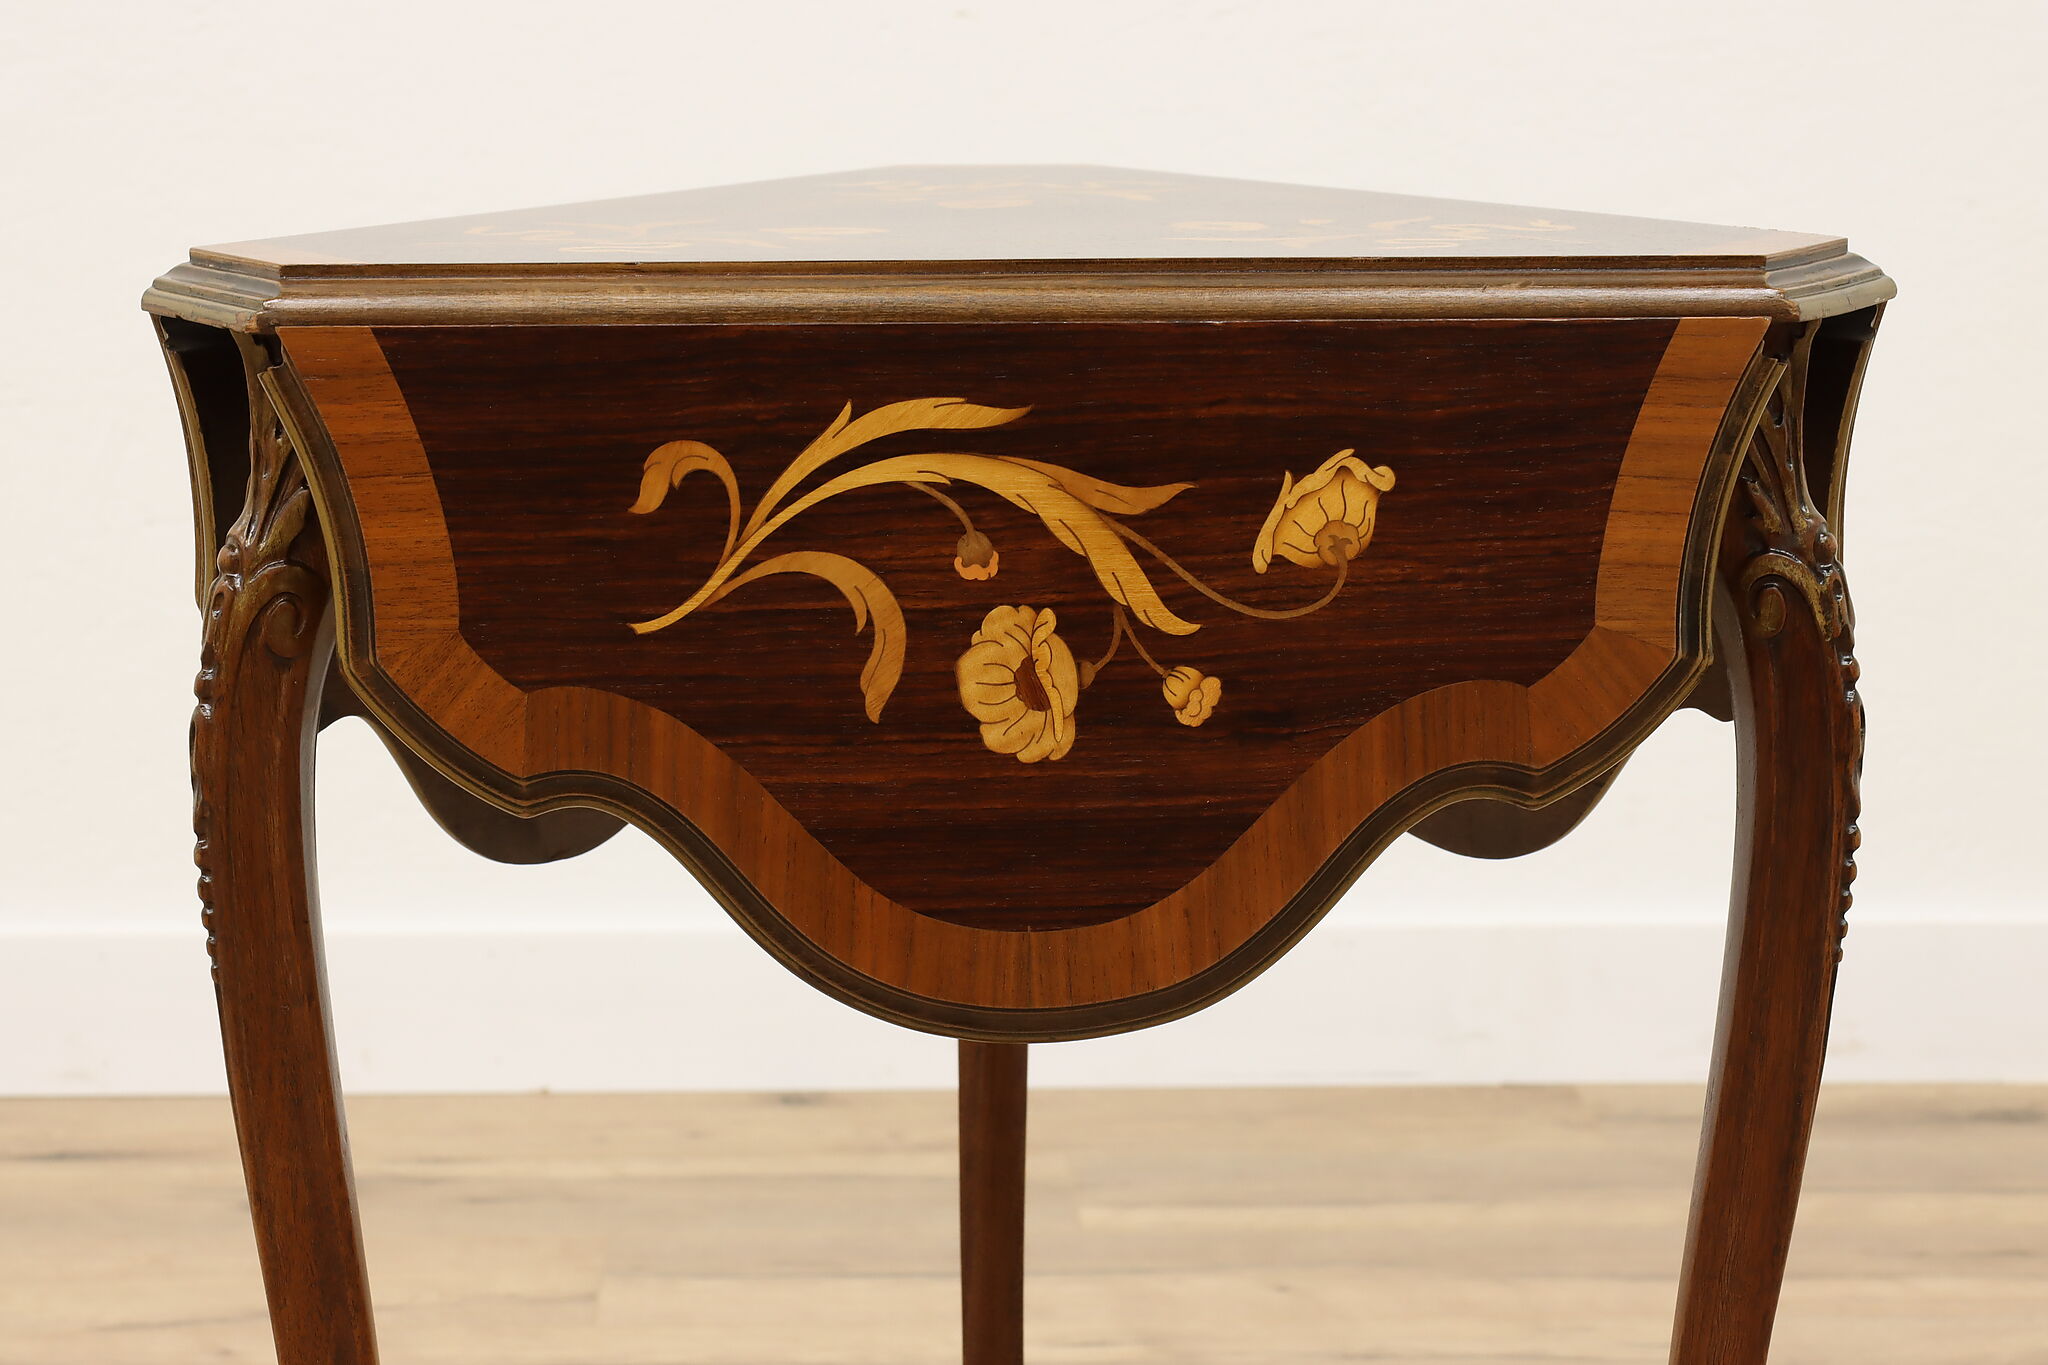 Lot - Birdseye maple butterfly drop leaf table with drawer, 20th C., turned  feet, drawer has dovetail construction, wear consistent with age, 27 h. x  31 w. closed: 13 1/4 l. open